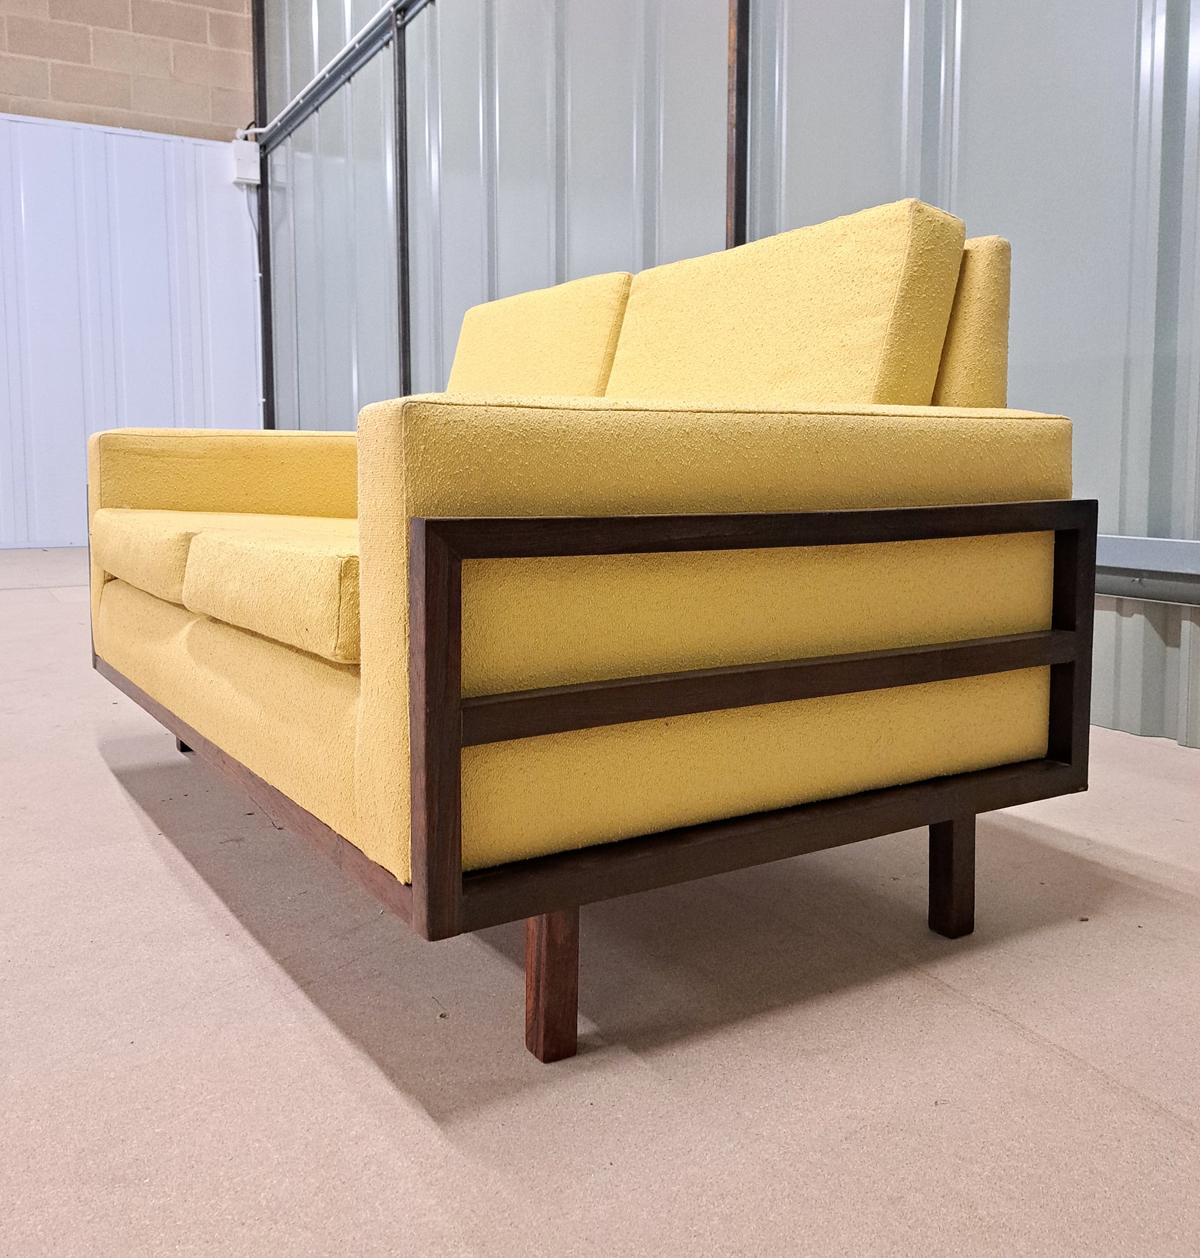 French Mid-Century Modern Sofa in a Light Yellow Bouclé Fabric For Sale 1